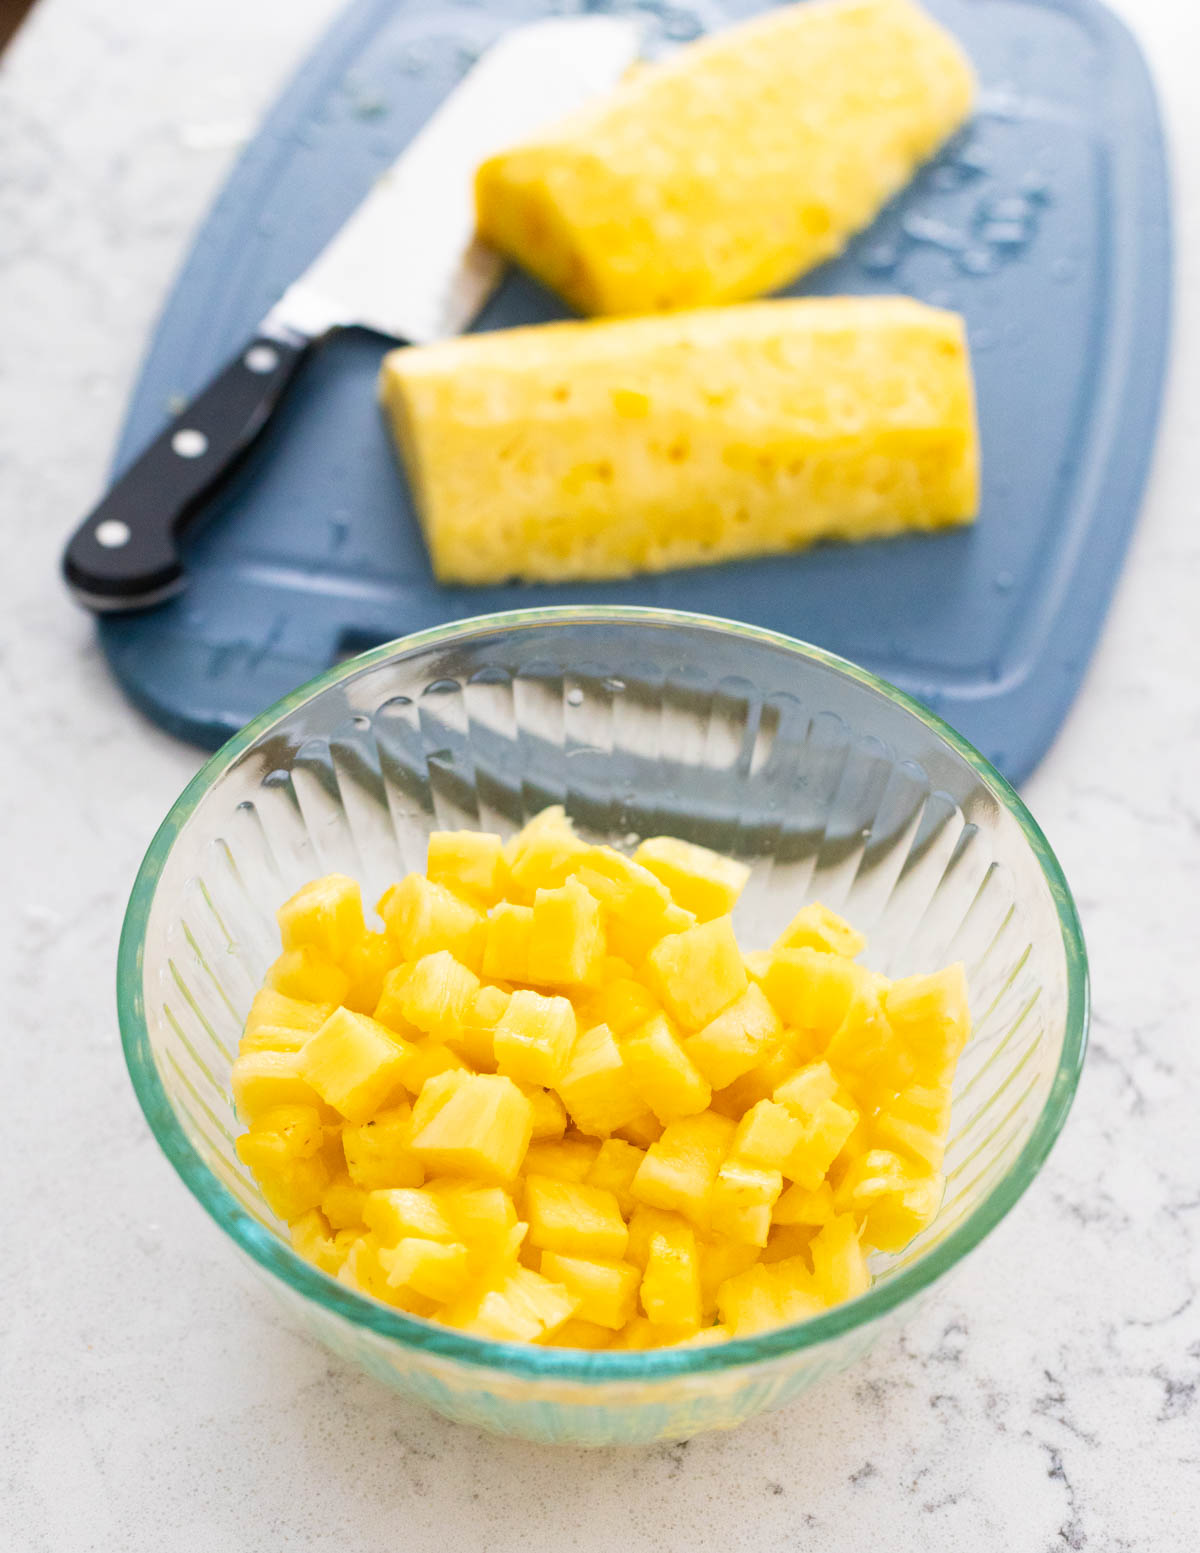 The fresh pineapple has been chopped and placed in a bowl.